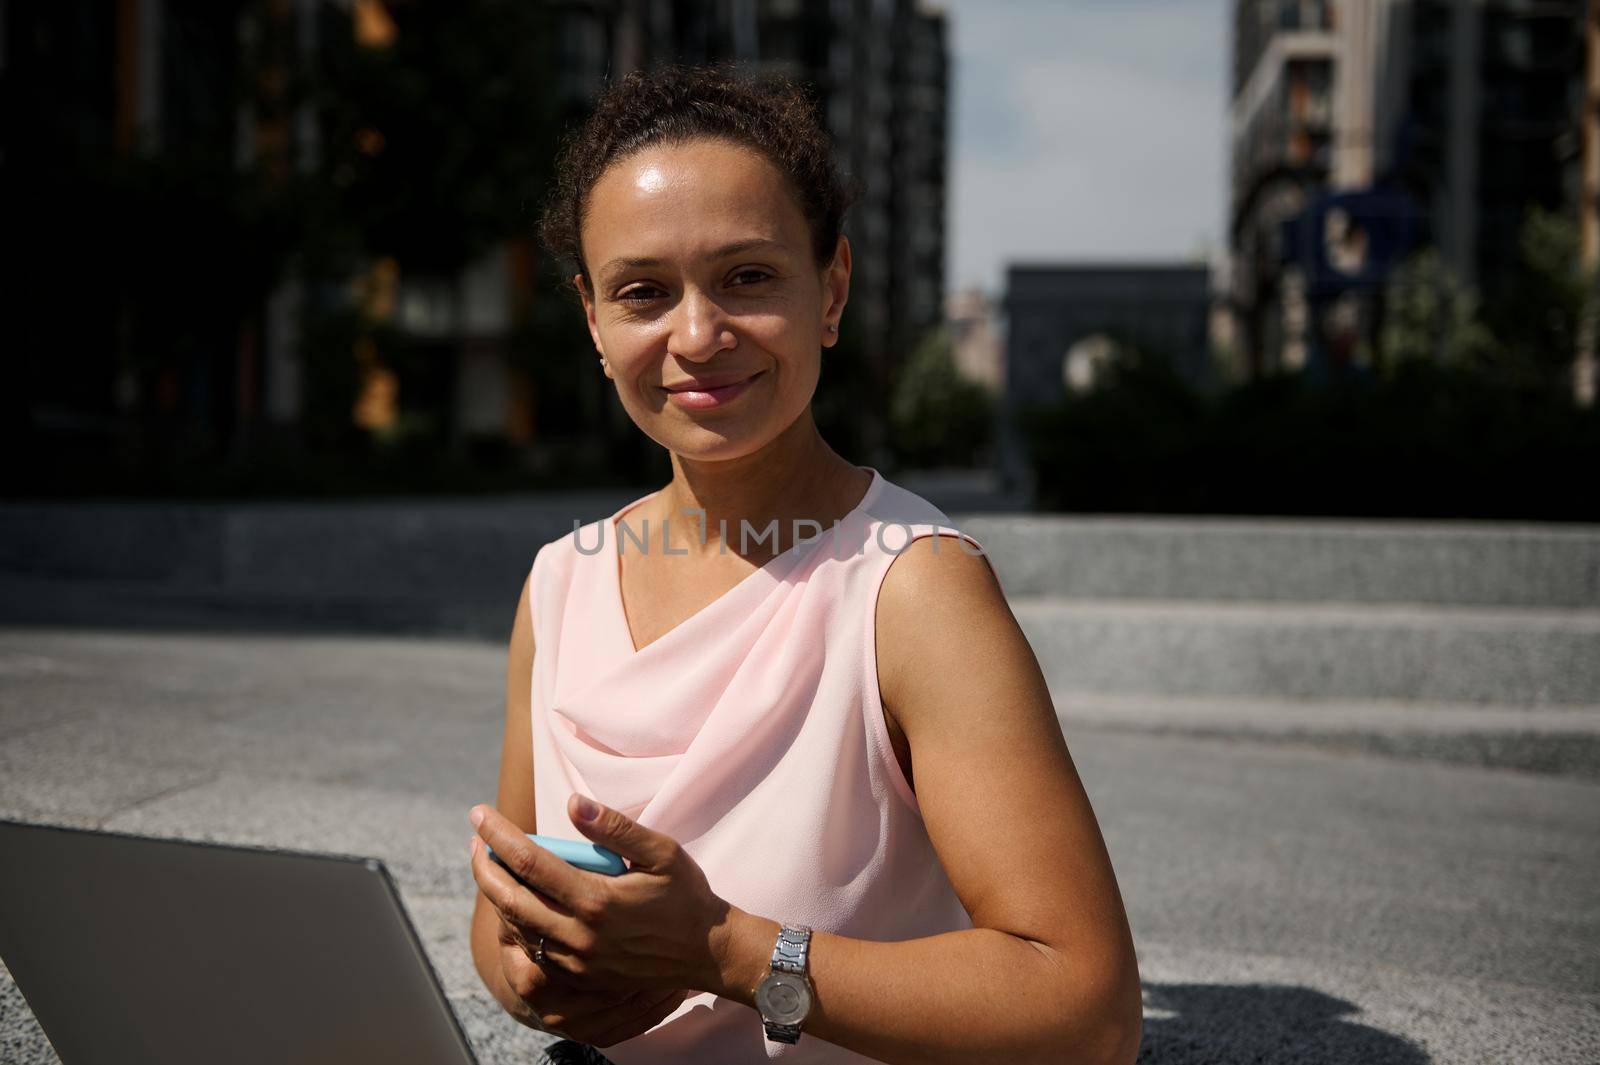 Confident close-up portrait of a beautiful mixed race business woman with laptop and smartphone looking at the camera sitting on steps on the background of urban tall buildings